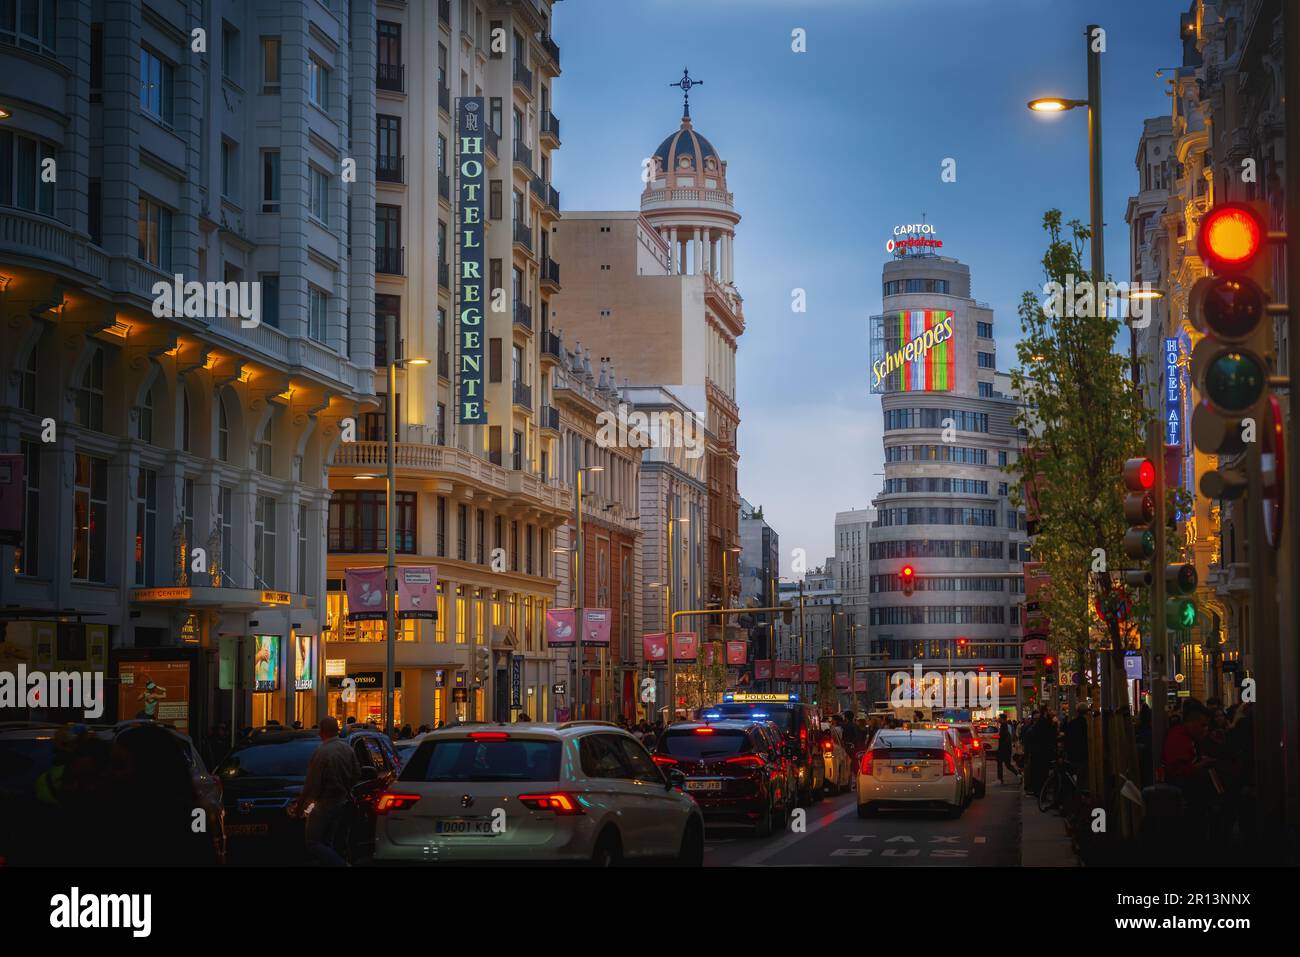 Illuminated Gran Via Street with Edificio Capitol (or Carrion) Building and Schweppes neon sign - Madrid, Spain Stock Photo